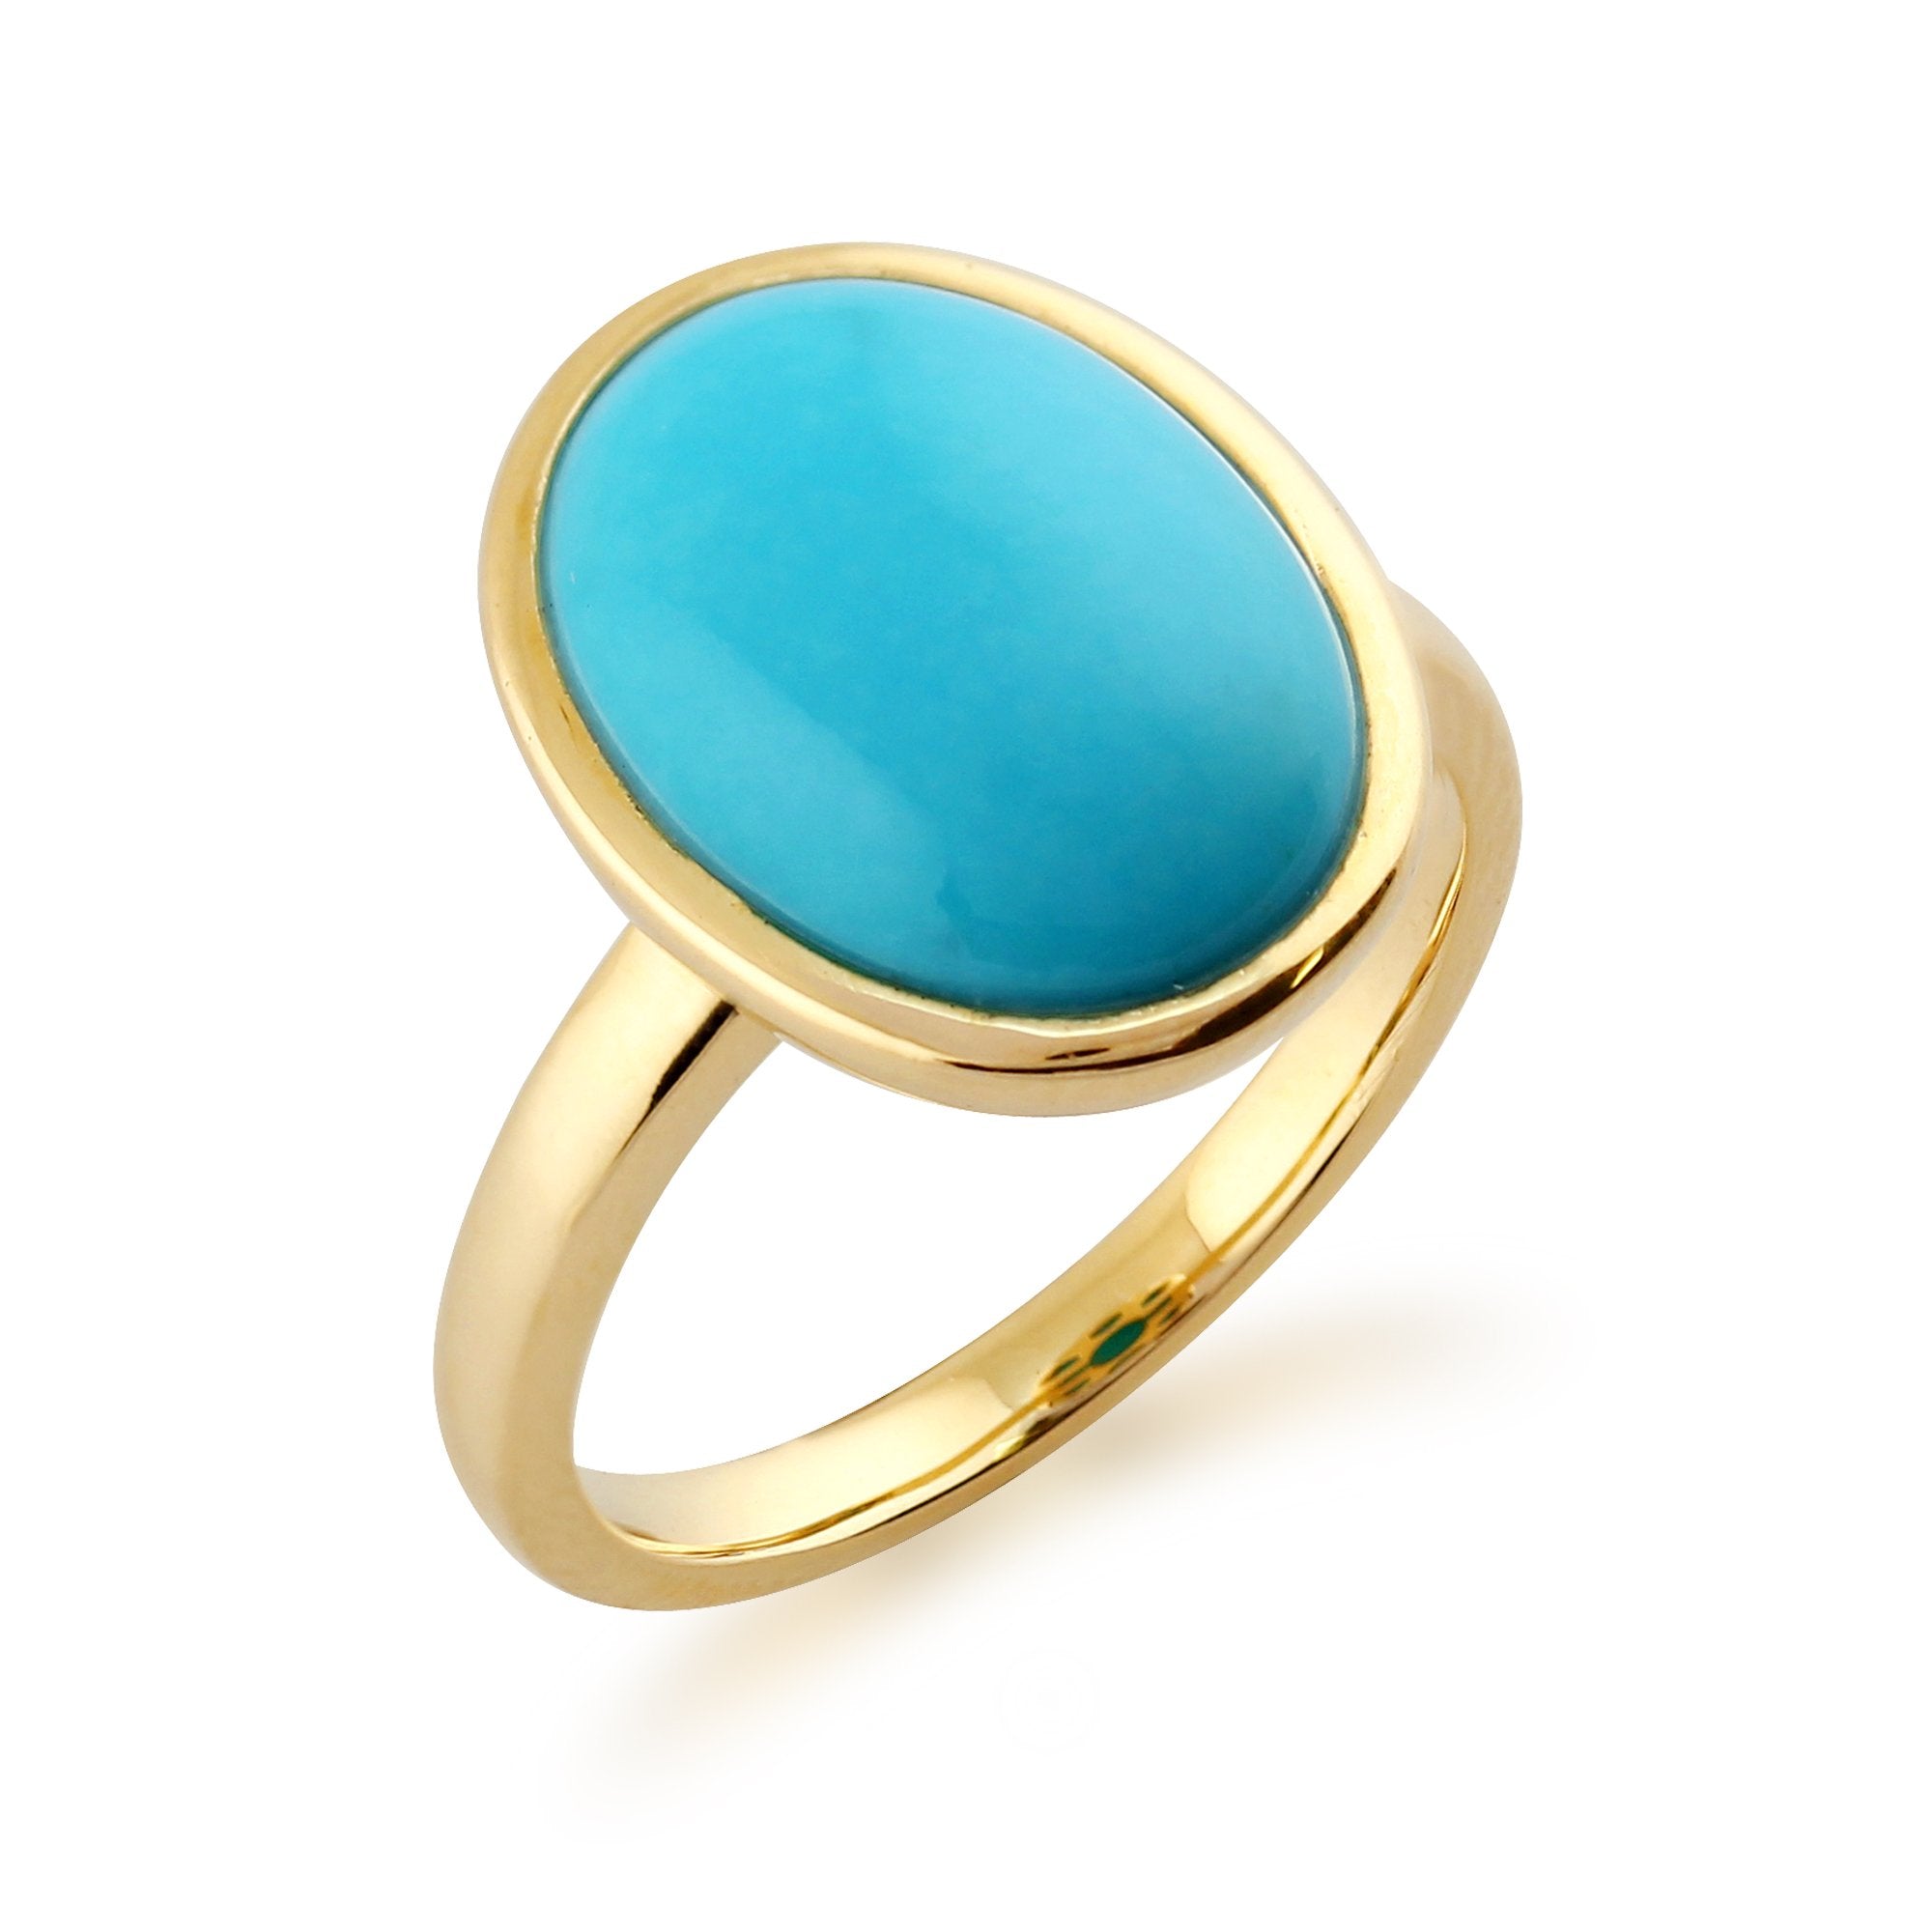 Statement Oval Turquoise Ring in 9ct Yellow Gold